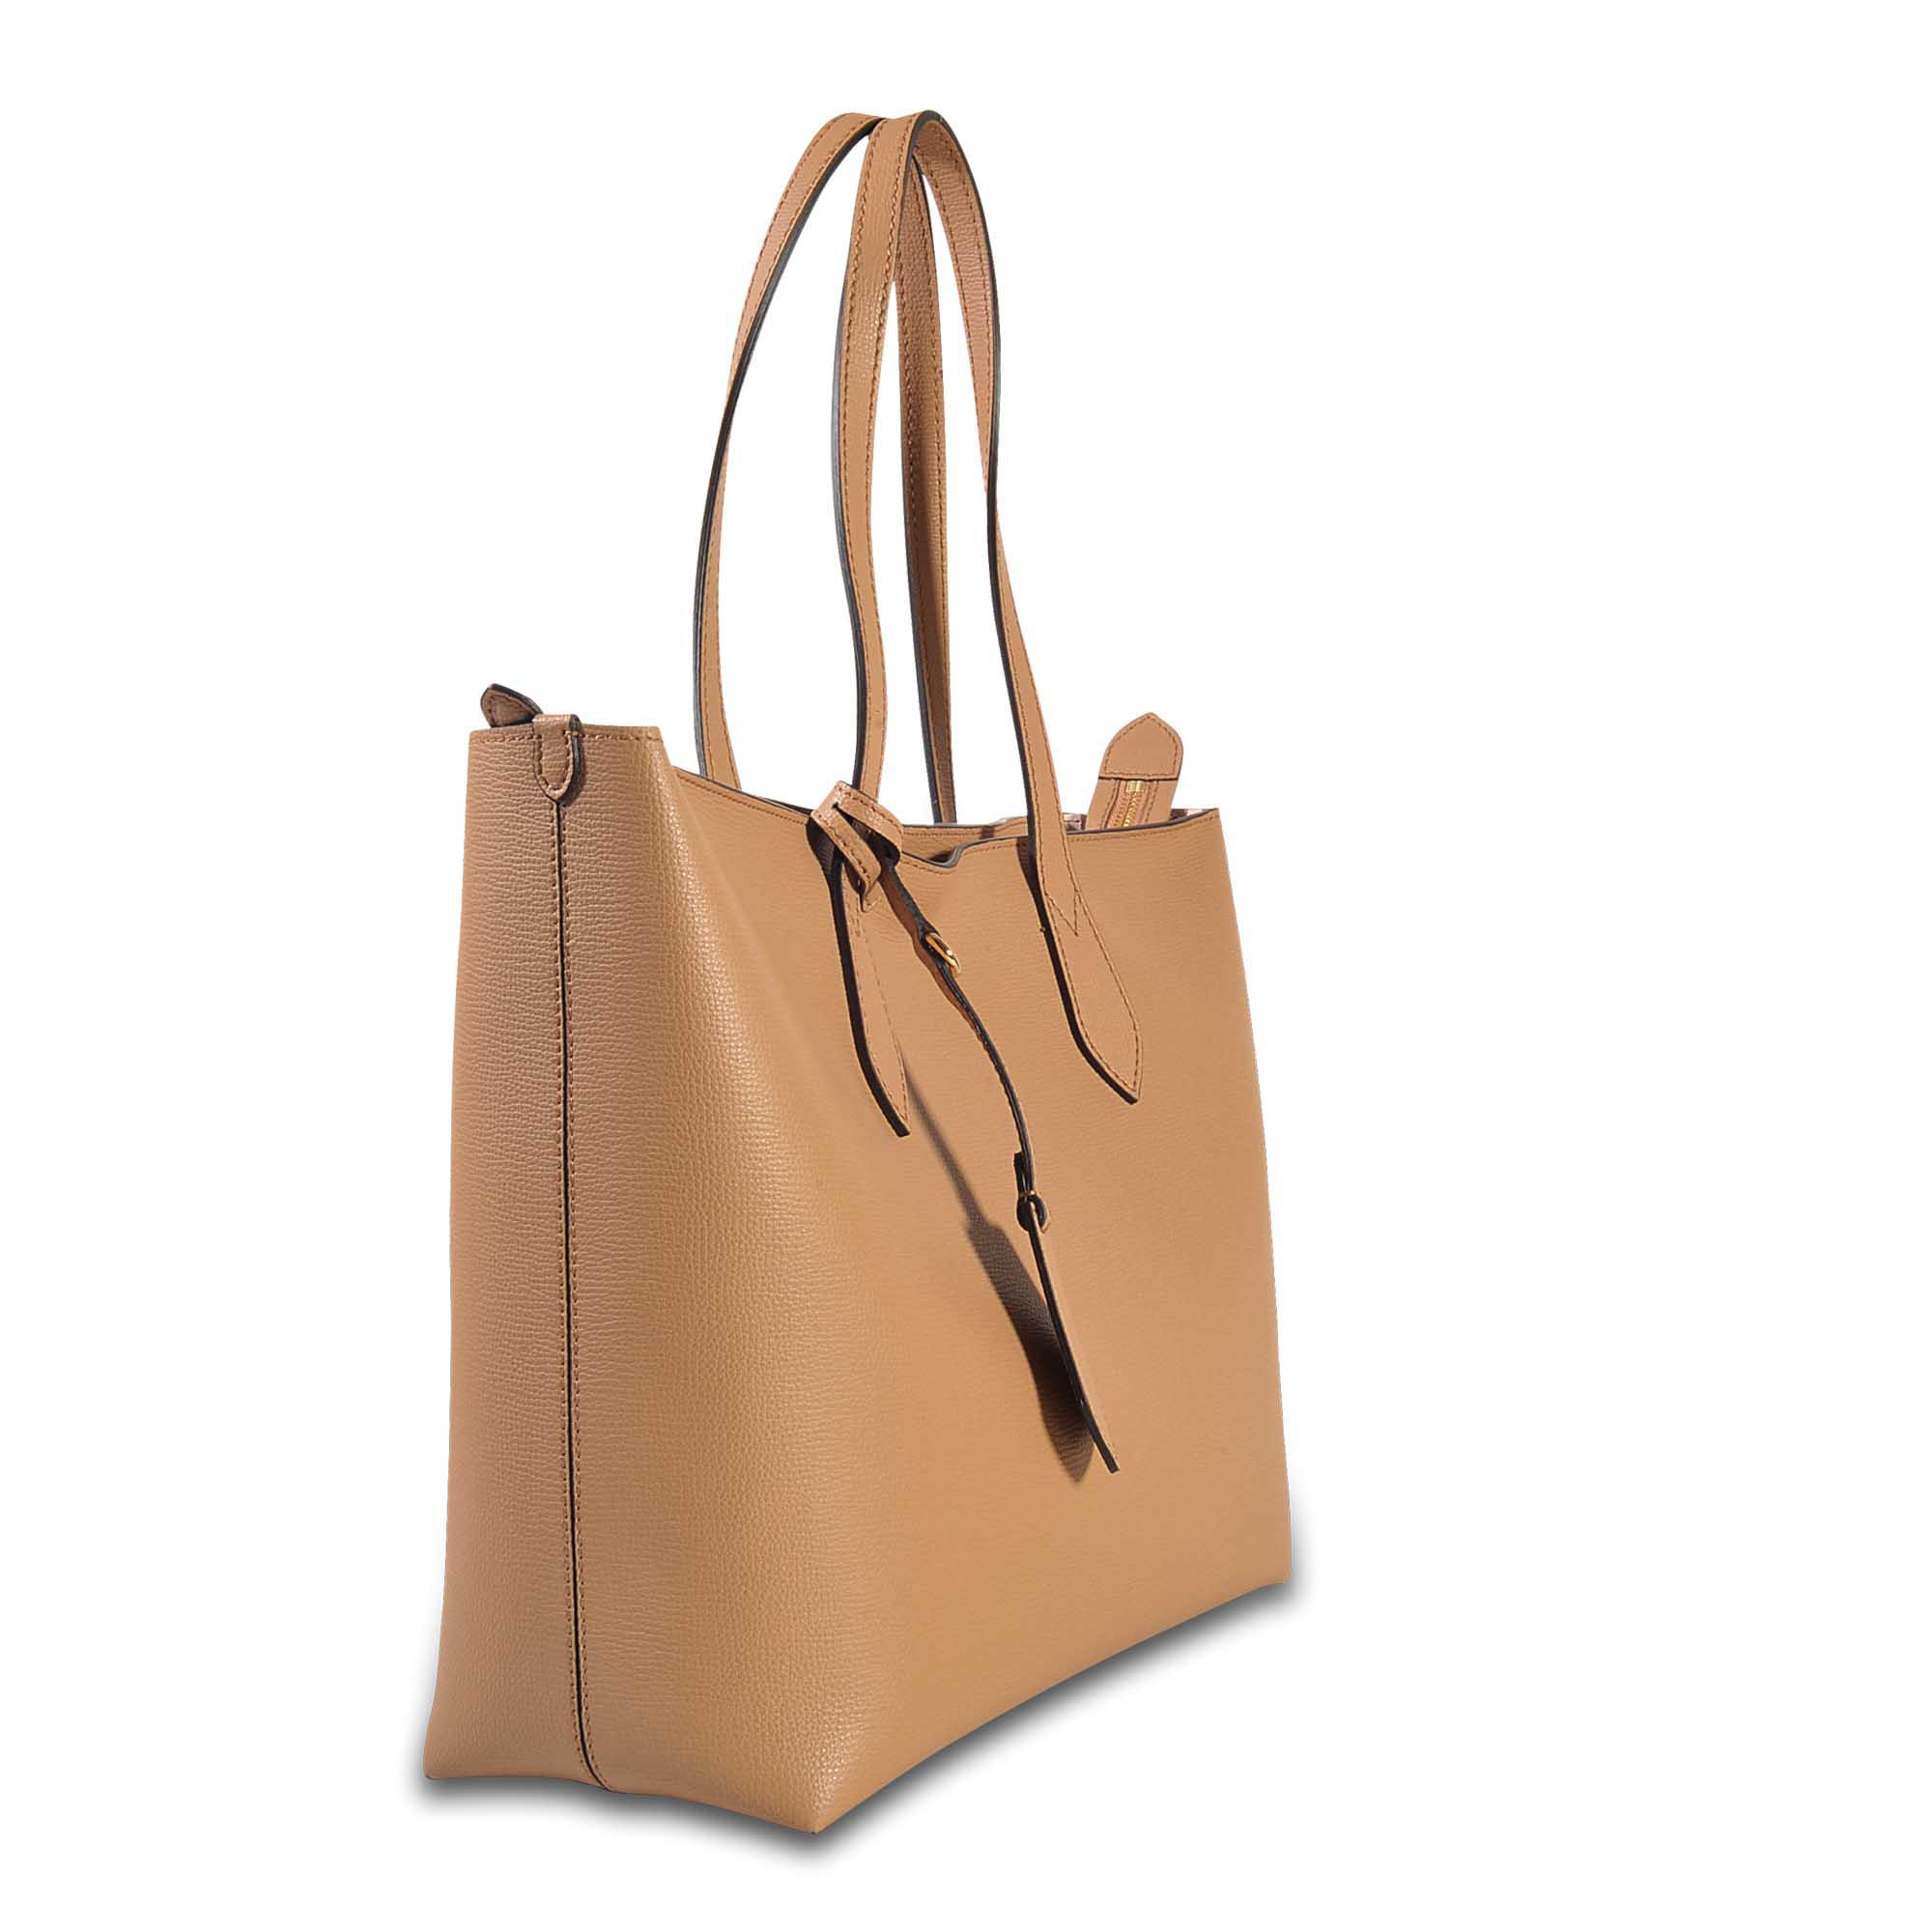 Burberry Ardwell Medium Zipped Tote in Brown - Lyst